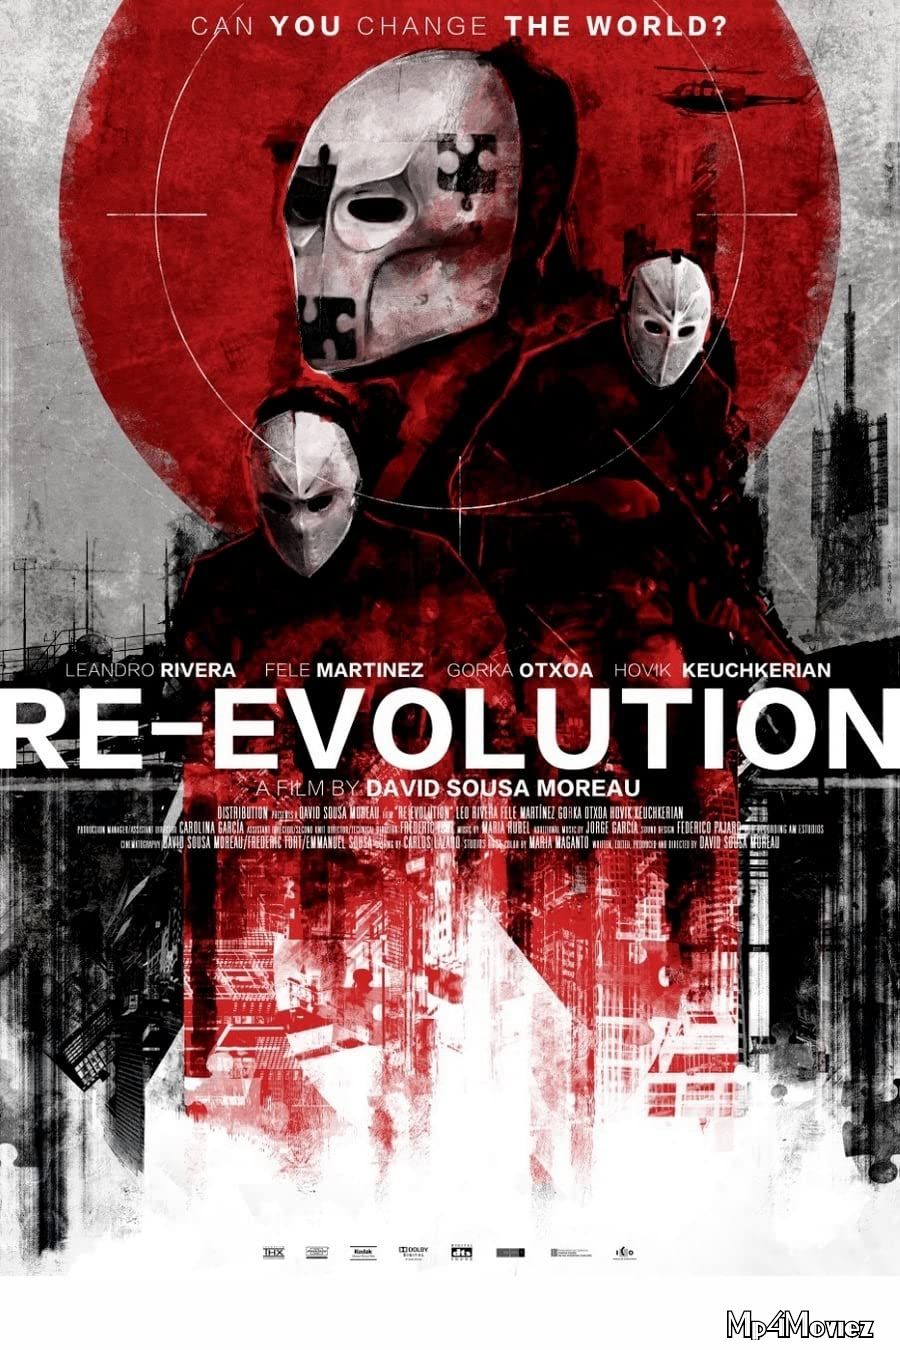 Re-Evolution (2017) Hindi Dubbed Full Movie download full movie